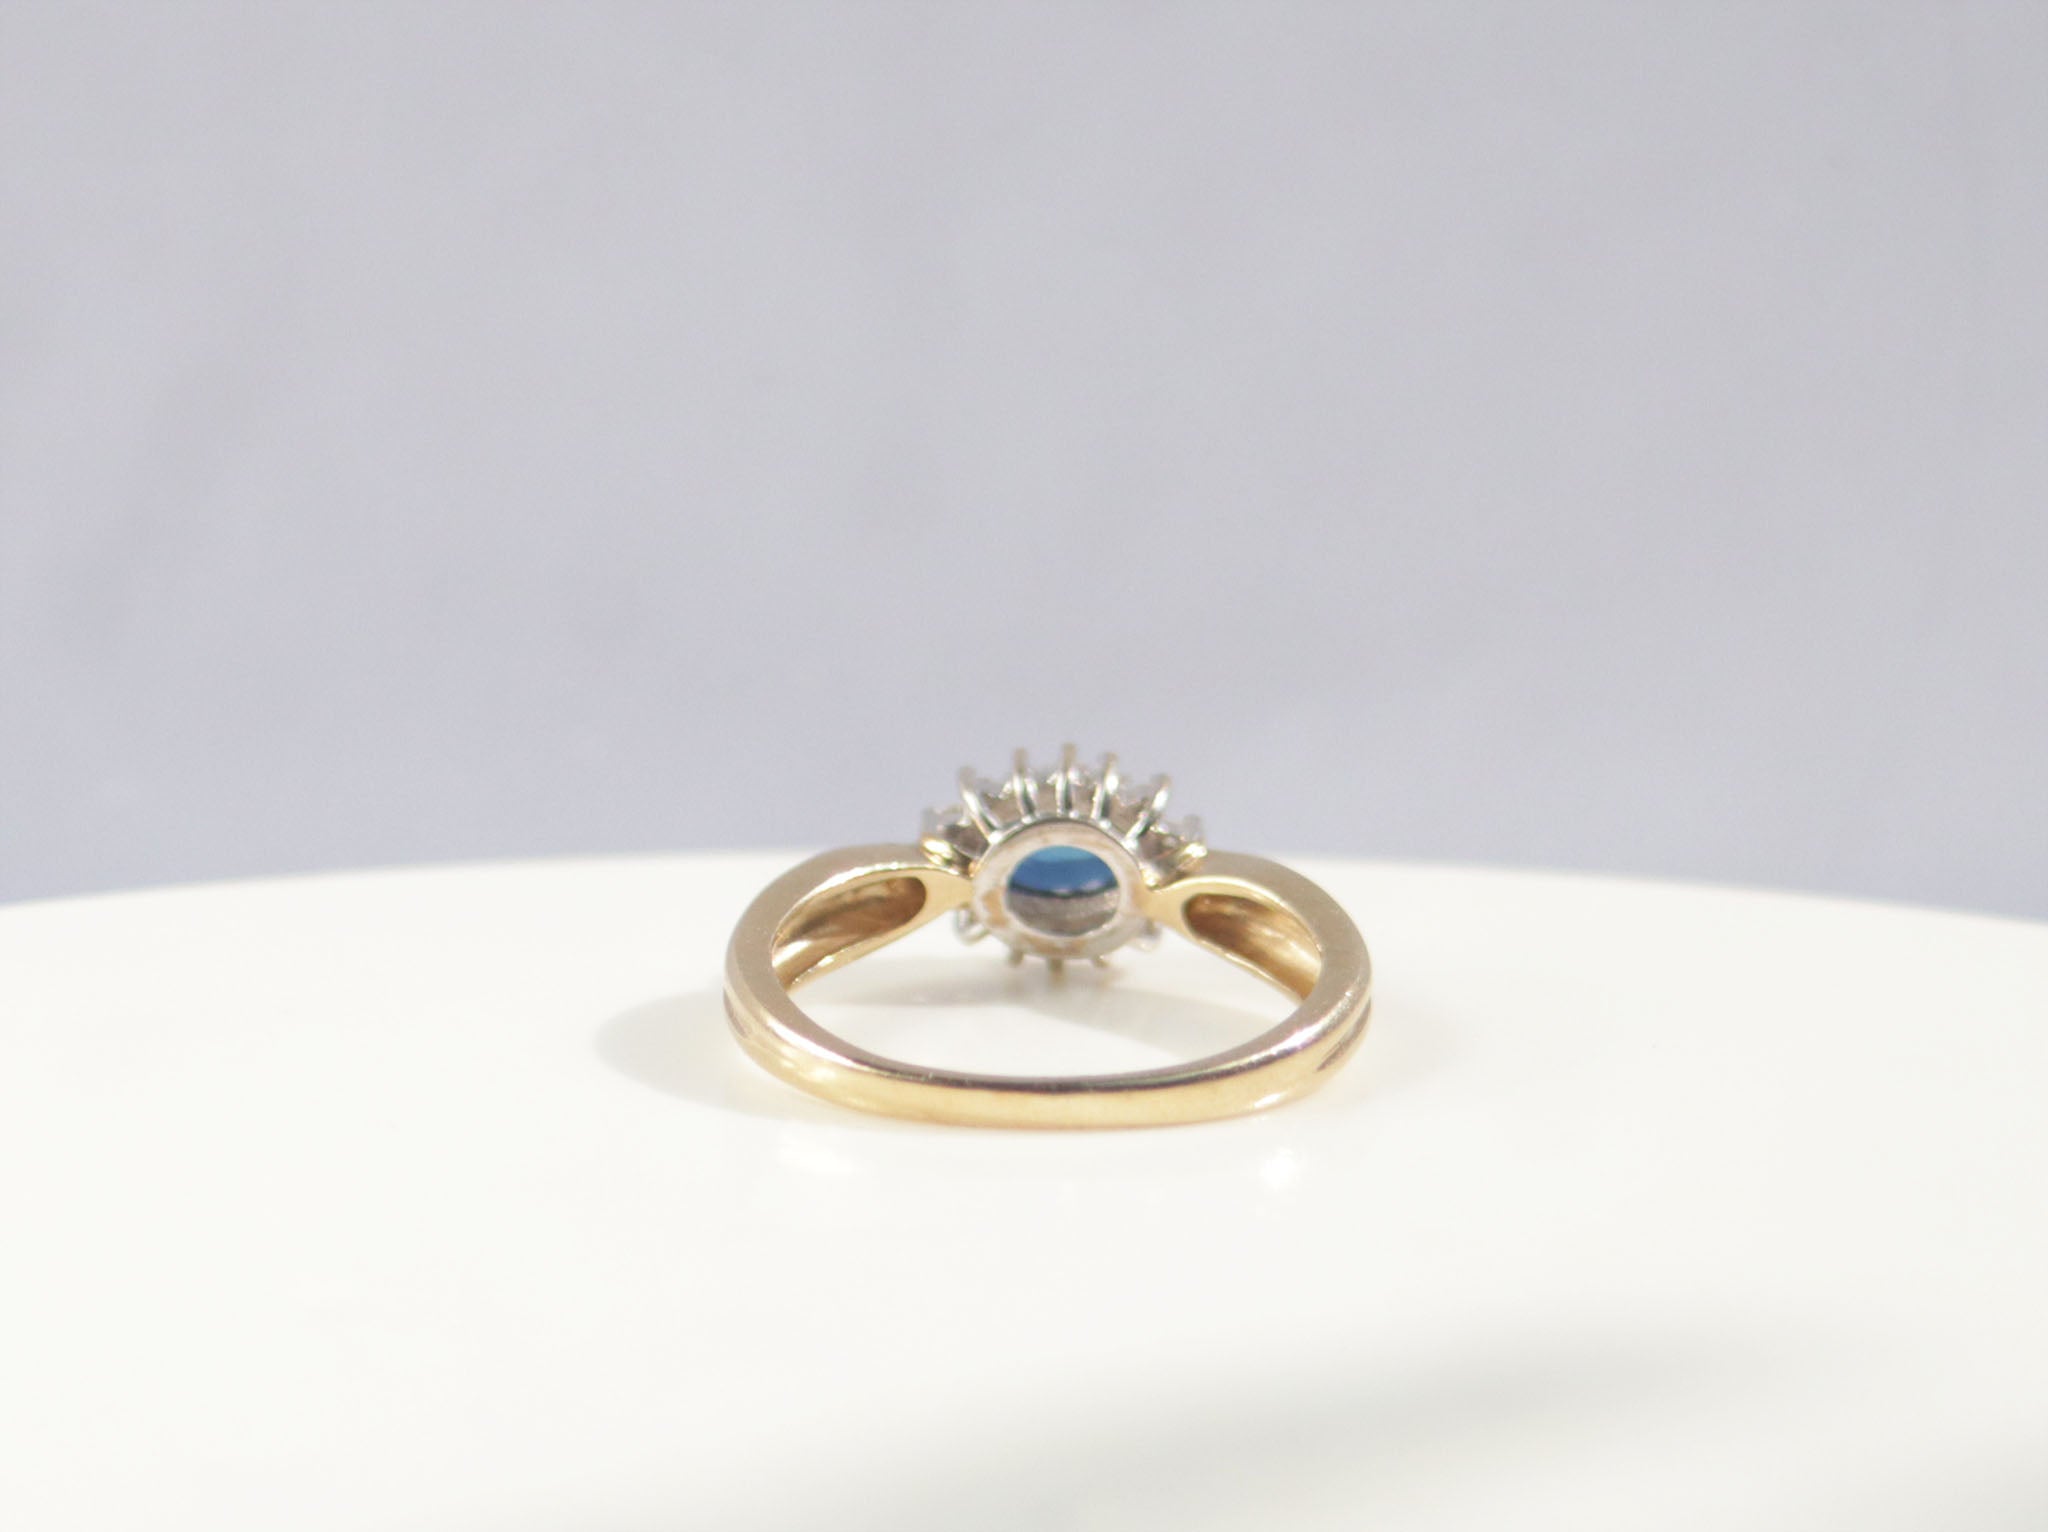 A classic Edwardian inspired sapphire and diamond ring. Crafted from 9ct yellow gold, this classic design features a vivid blue sapphire surrounded by fourteen round brilliant cut diamonds. With a carat weight of 0.75ct, the rich blue sapphire takes centre stage among a cluster of round brilliant diamonds. 